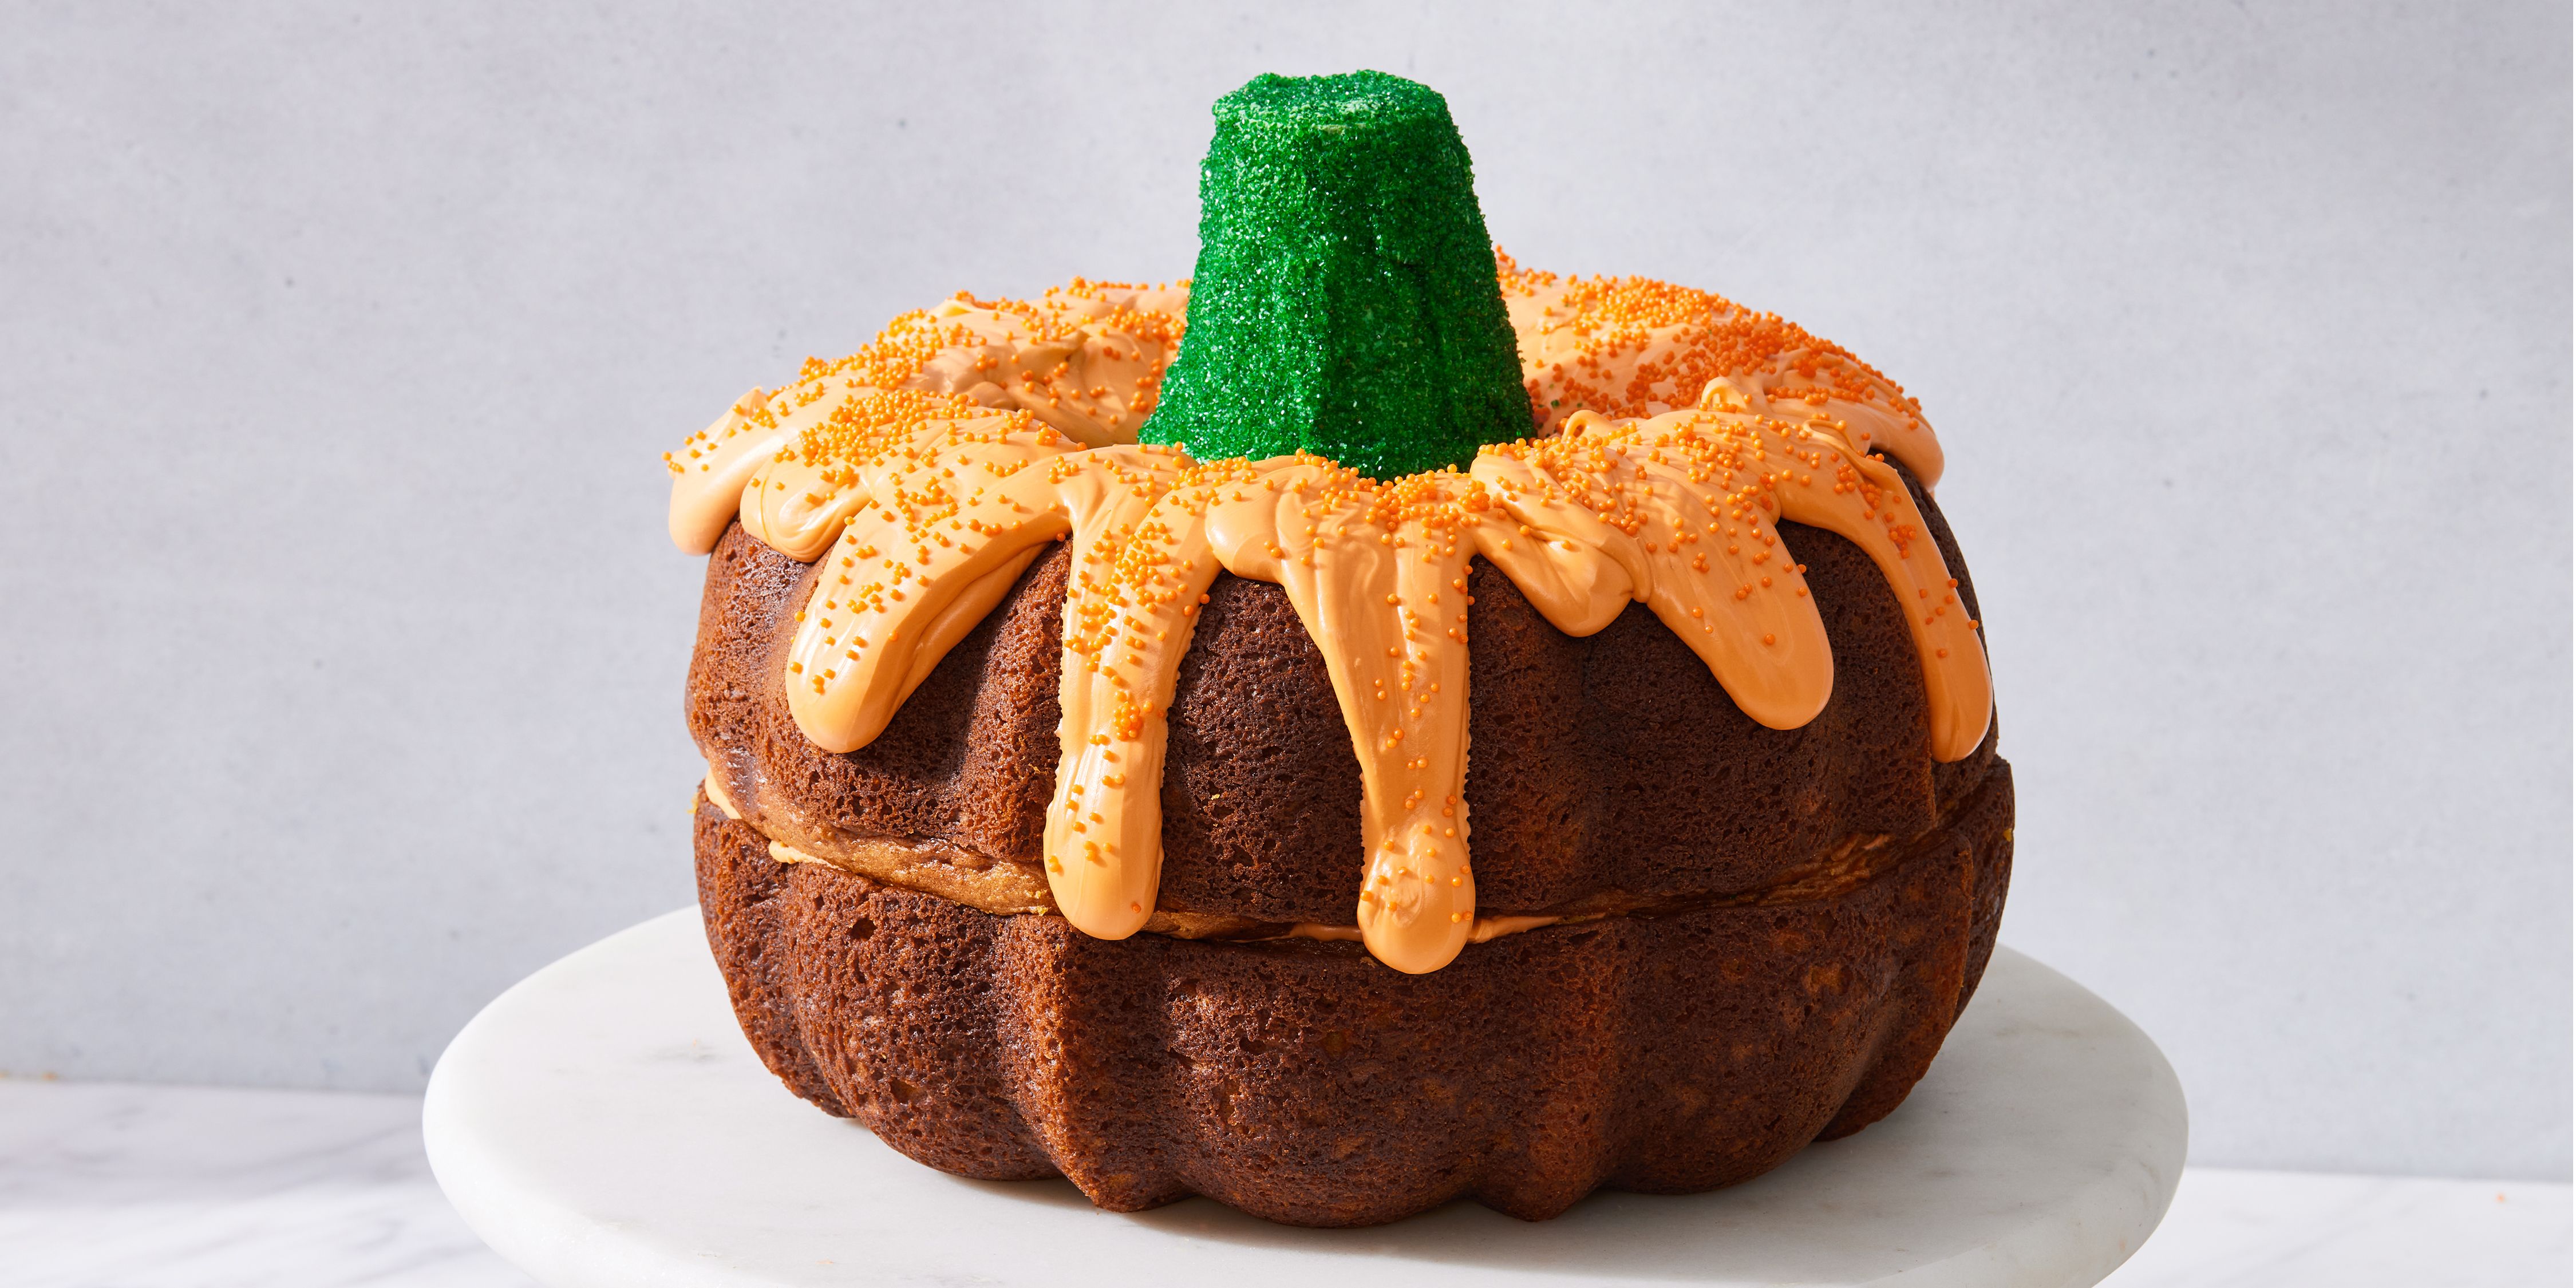 Spice up Halloween with this chocolate bundt cake with candy corn glaze -  Good Morning America